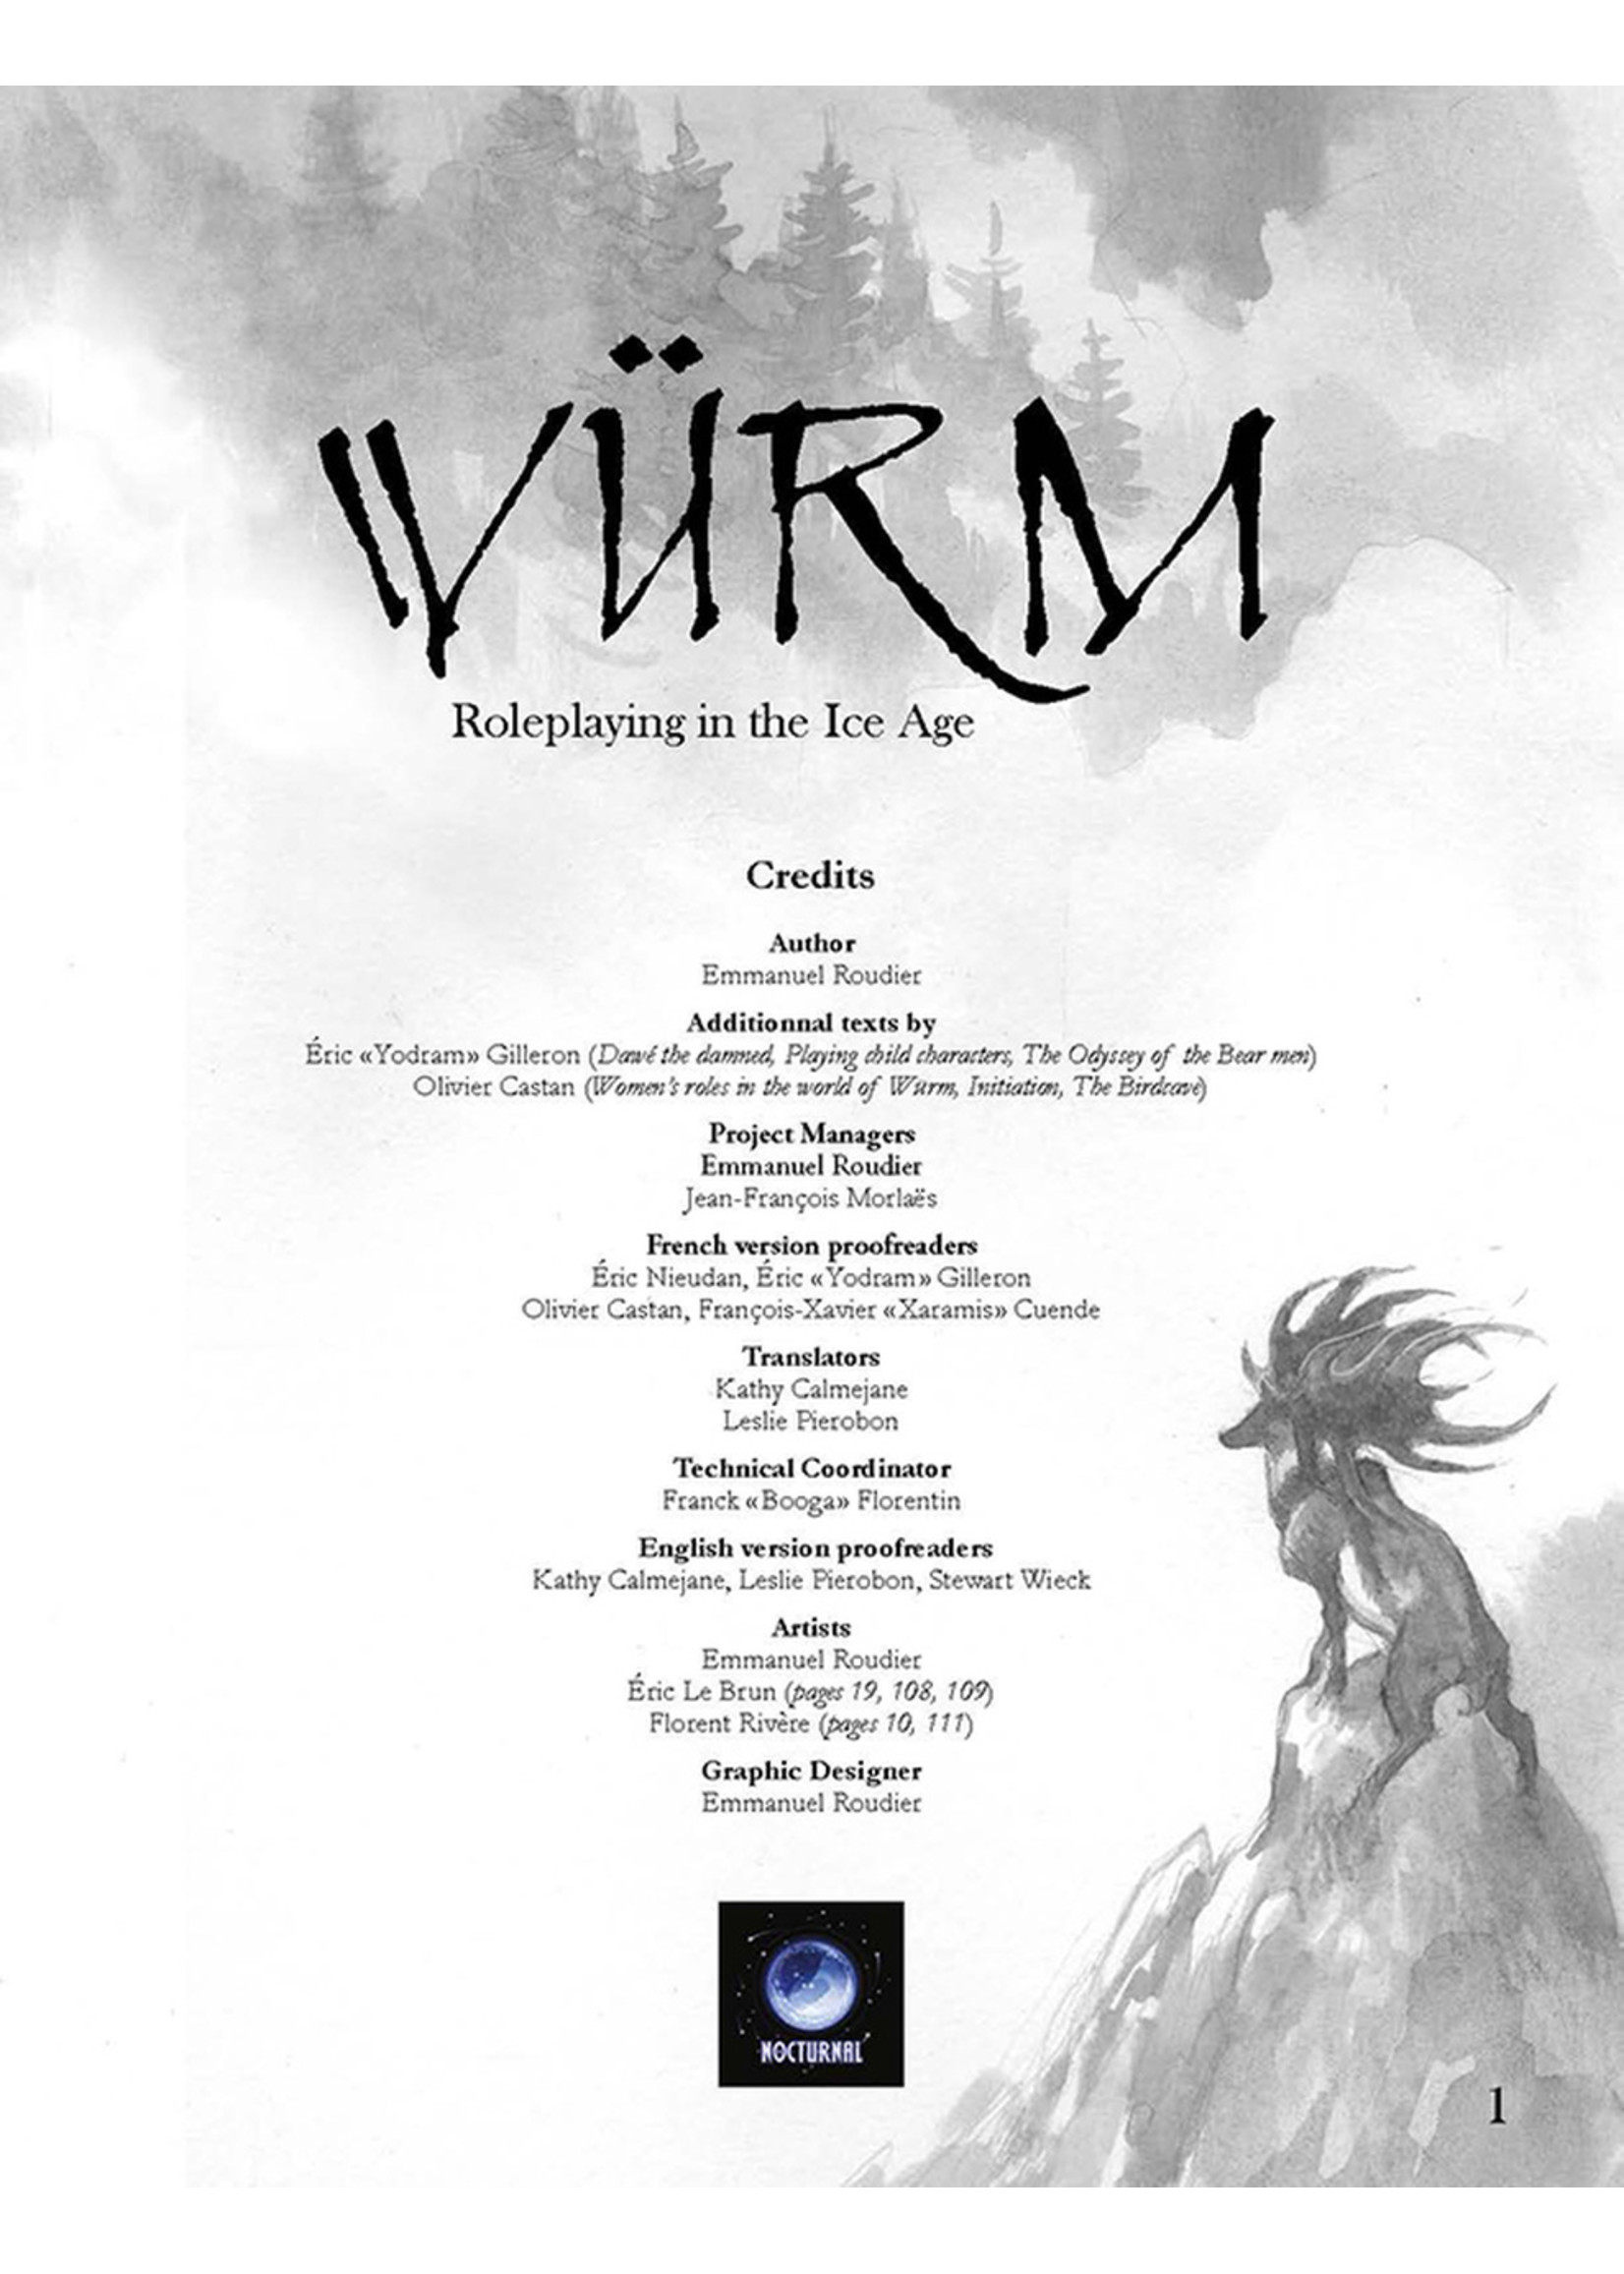 Chthonstone Games Wurm RPG: Core Rulebook - Ice Age